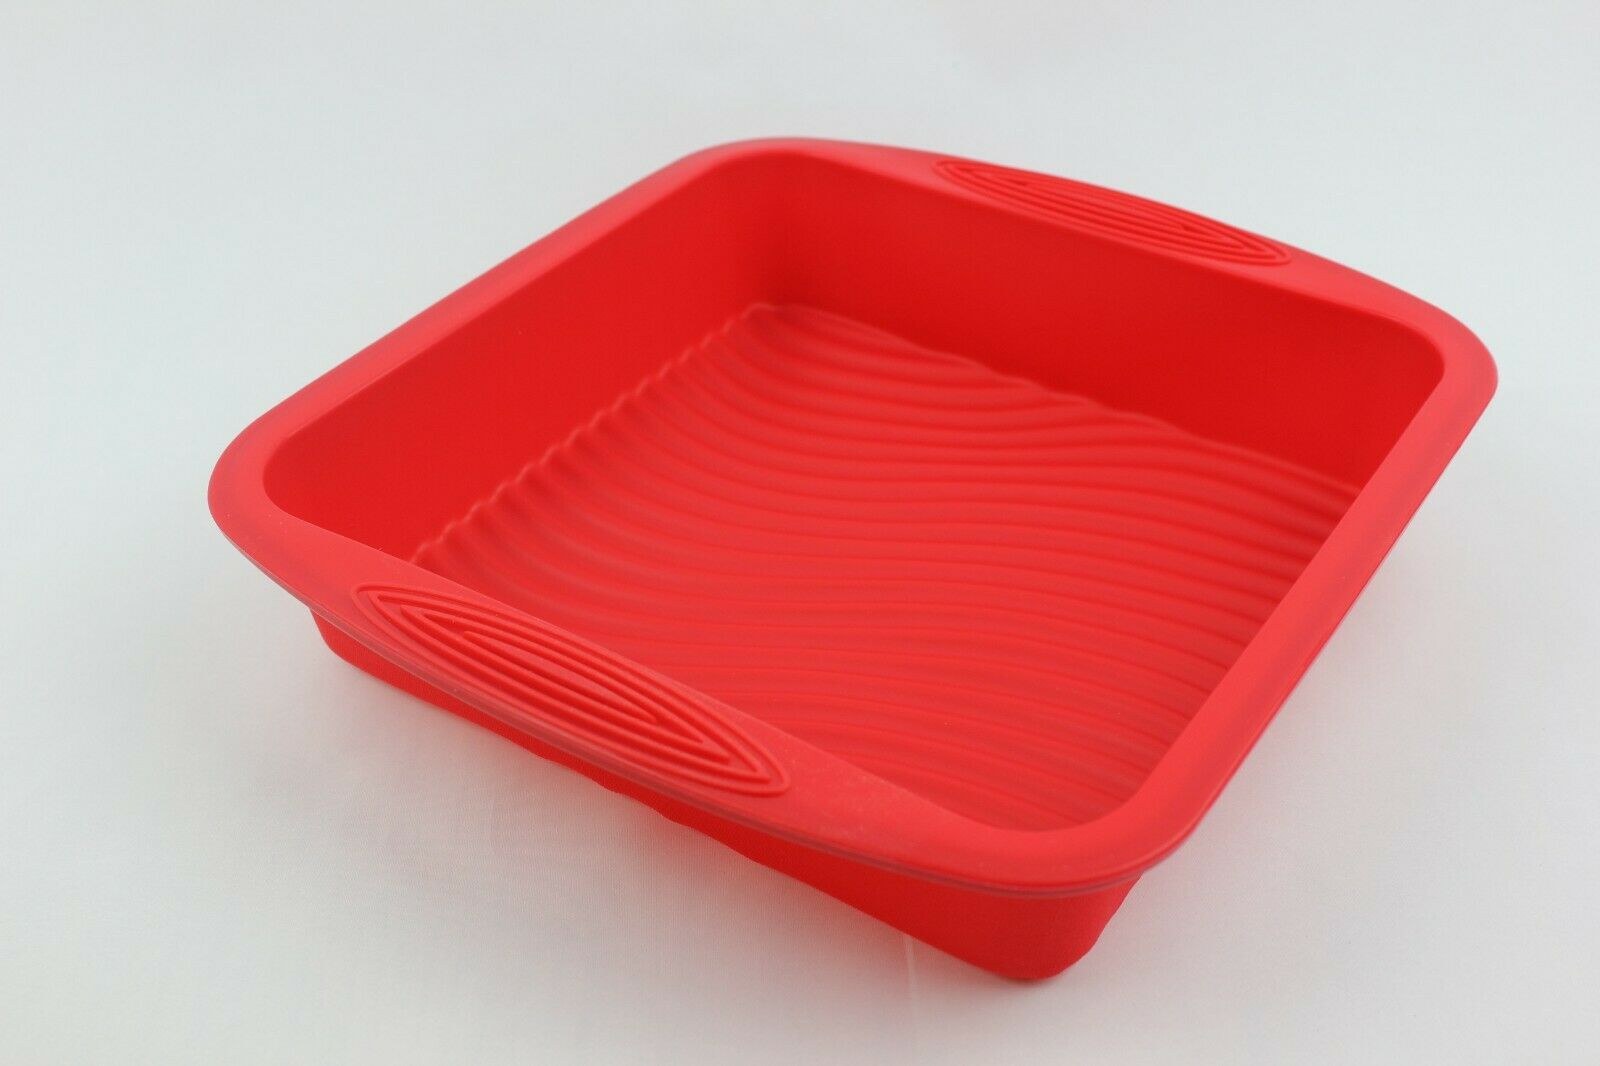 SQUARE 24x24x5cms BROWNIE CAKE BAKING TIN TRAY SET LASAGNE BREAD SILICONE